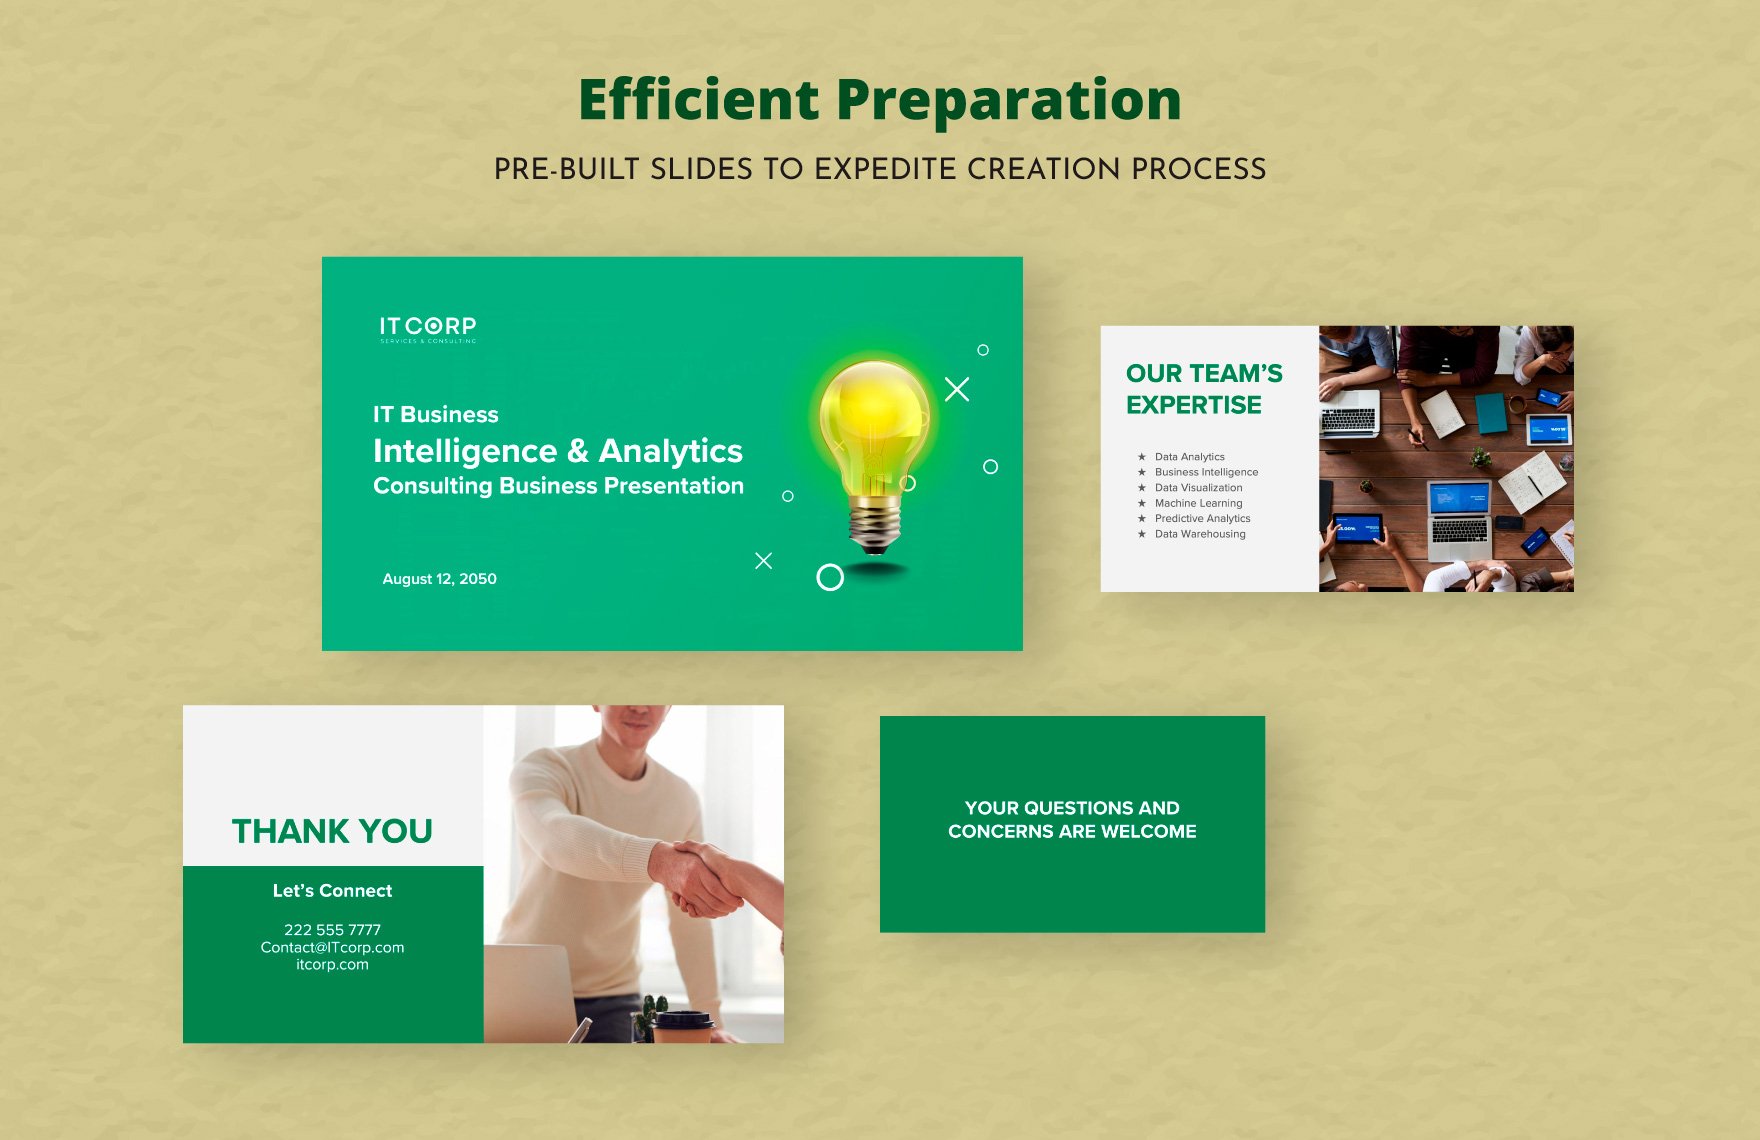 IT Business Intelligence & Analytics Consulting Business Presentation Template